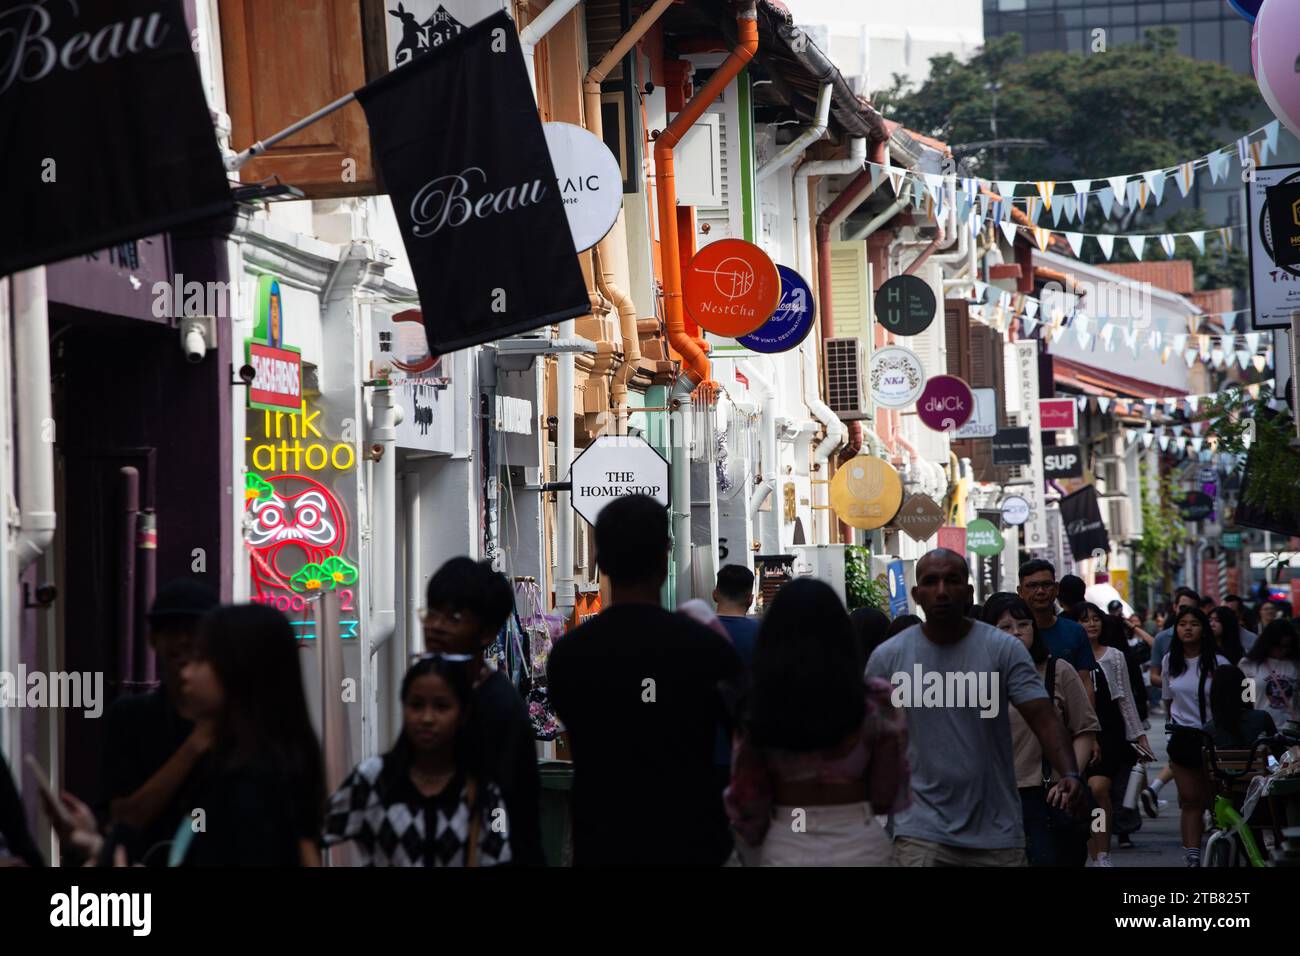 Buzzing with people at Haji Lane, the scene is divided into light and shadow creating a mystery silhouette effect of the people. Singapore. Stock Photo